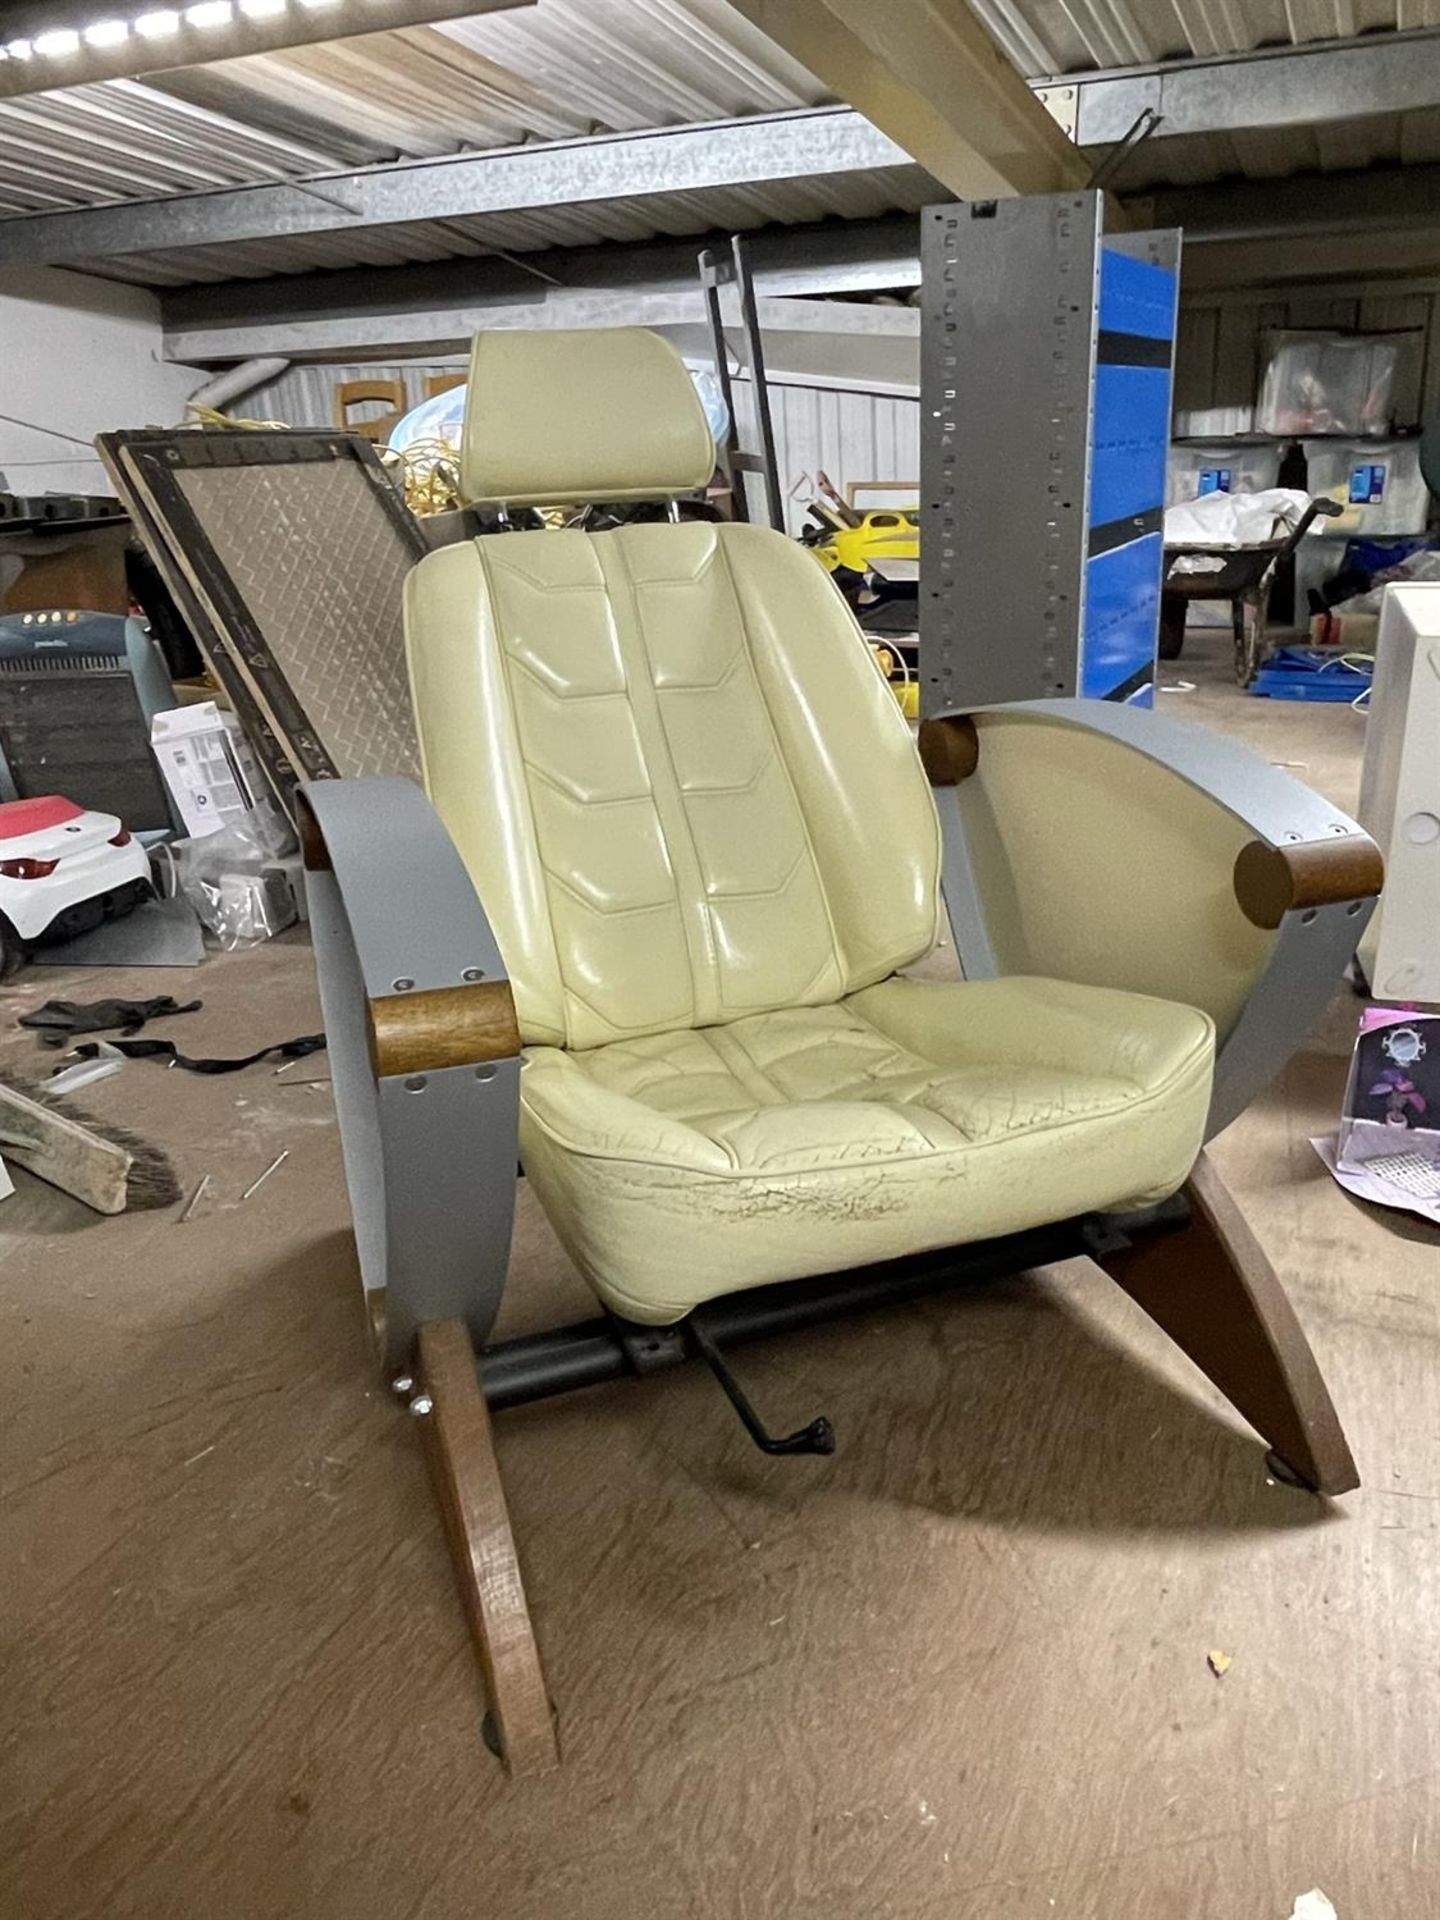 Pair of Ferrari 308 Crema Leather Seats on Substantial Bases - Image 3 of 10